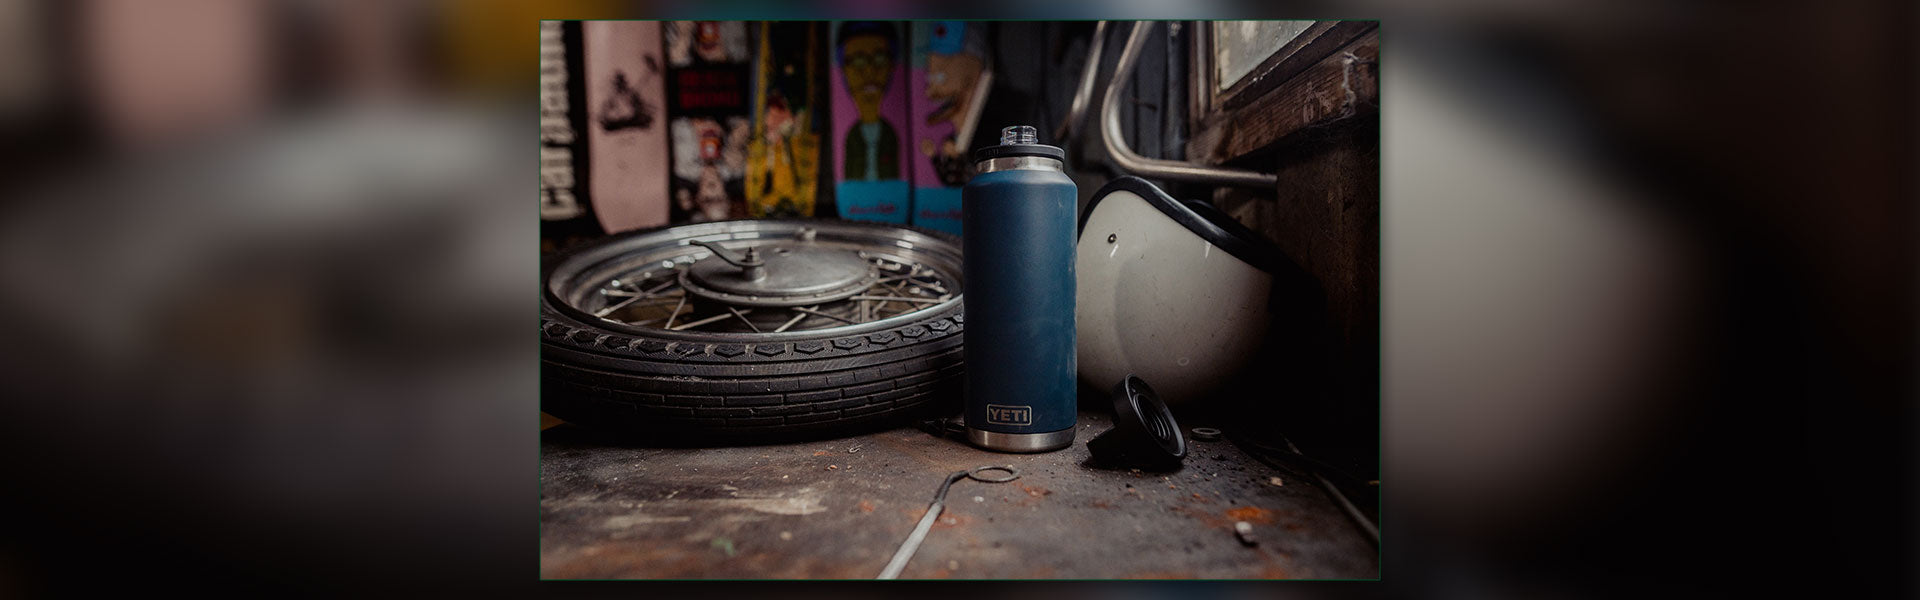 A very manly image featuring the Yeti Rambler bottle